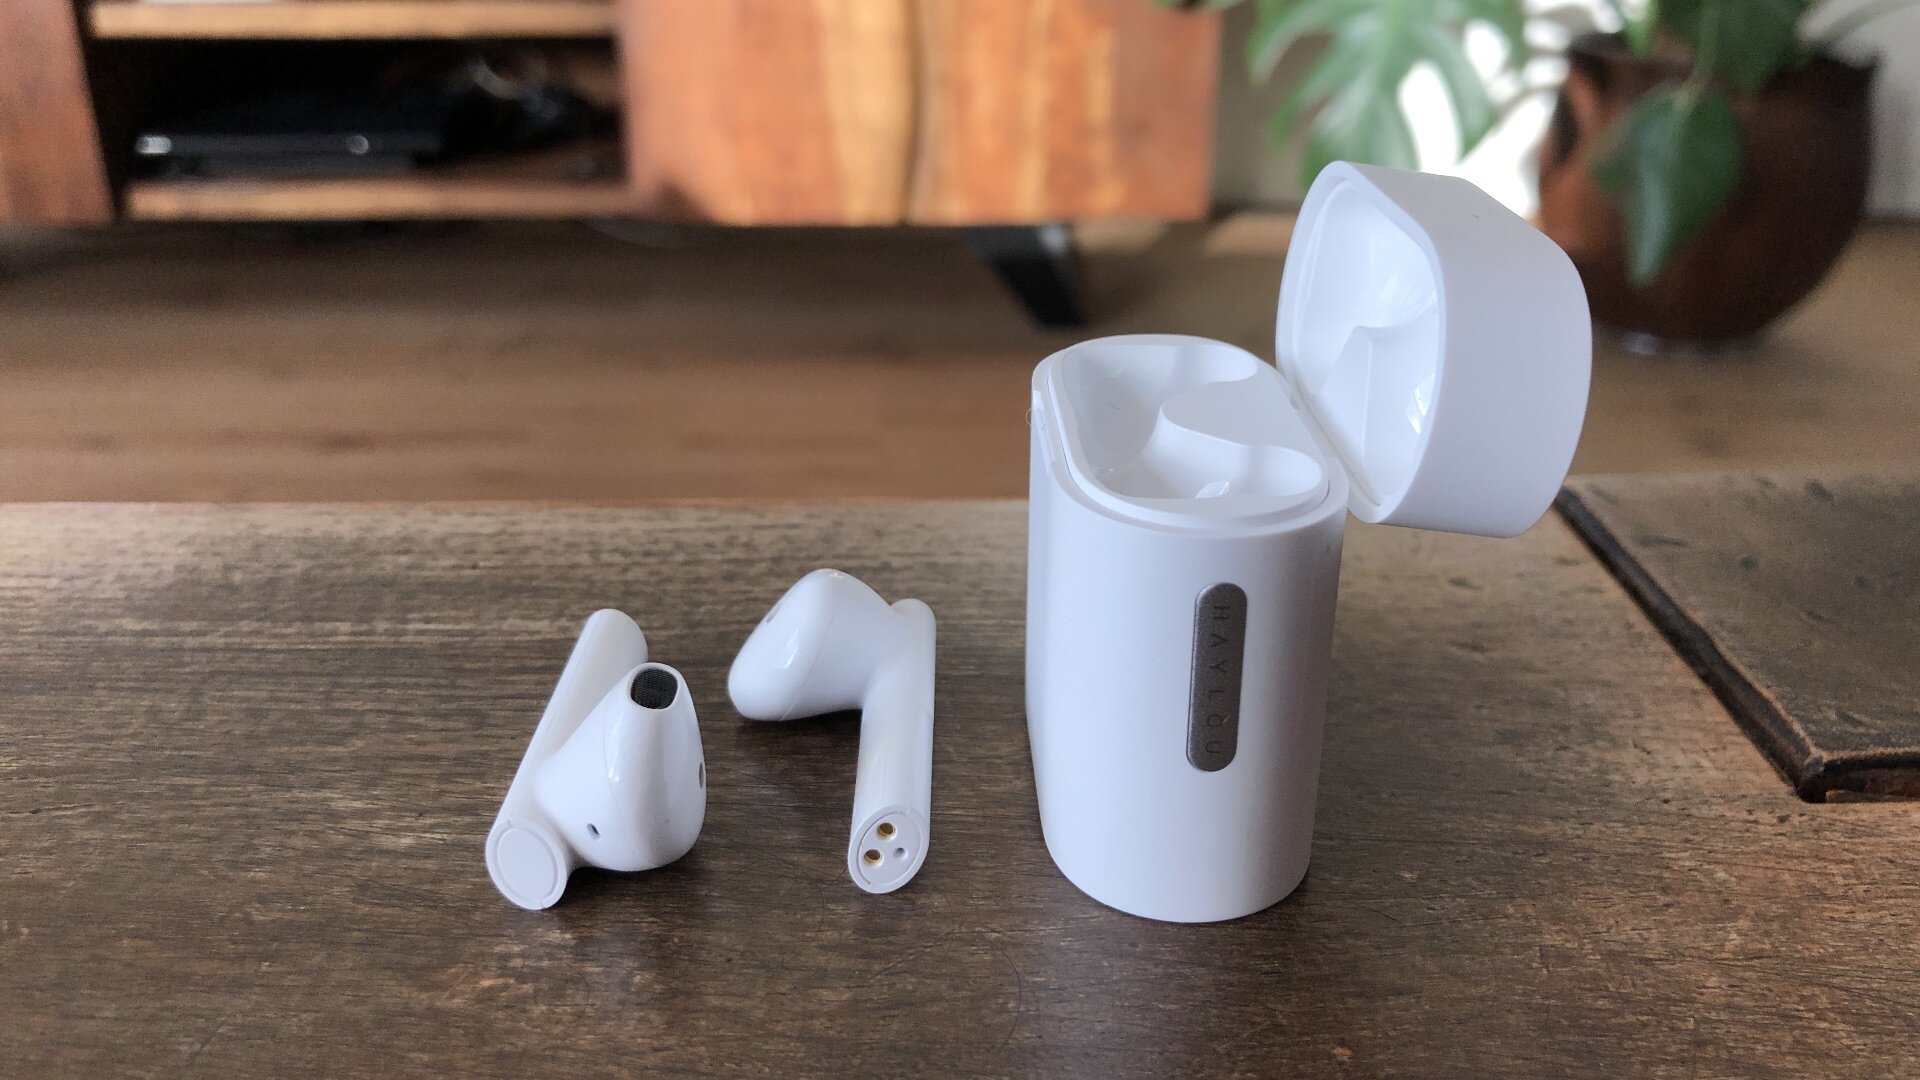 Haylou Moripods Review: Great Cheap Airpods-Alternative